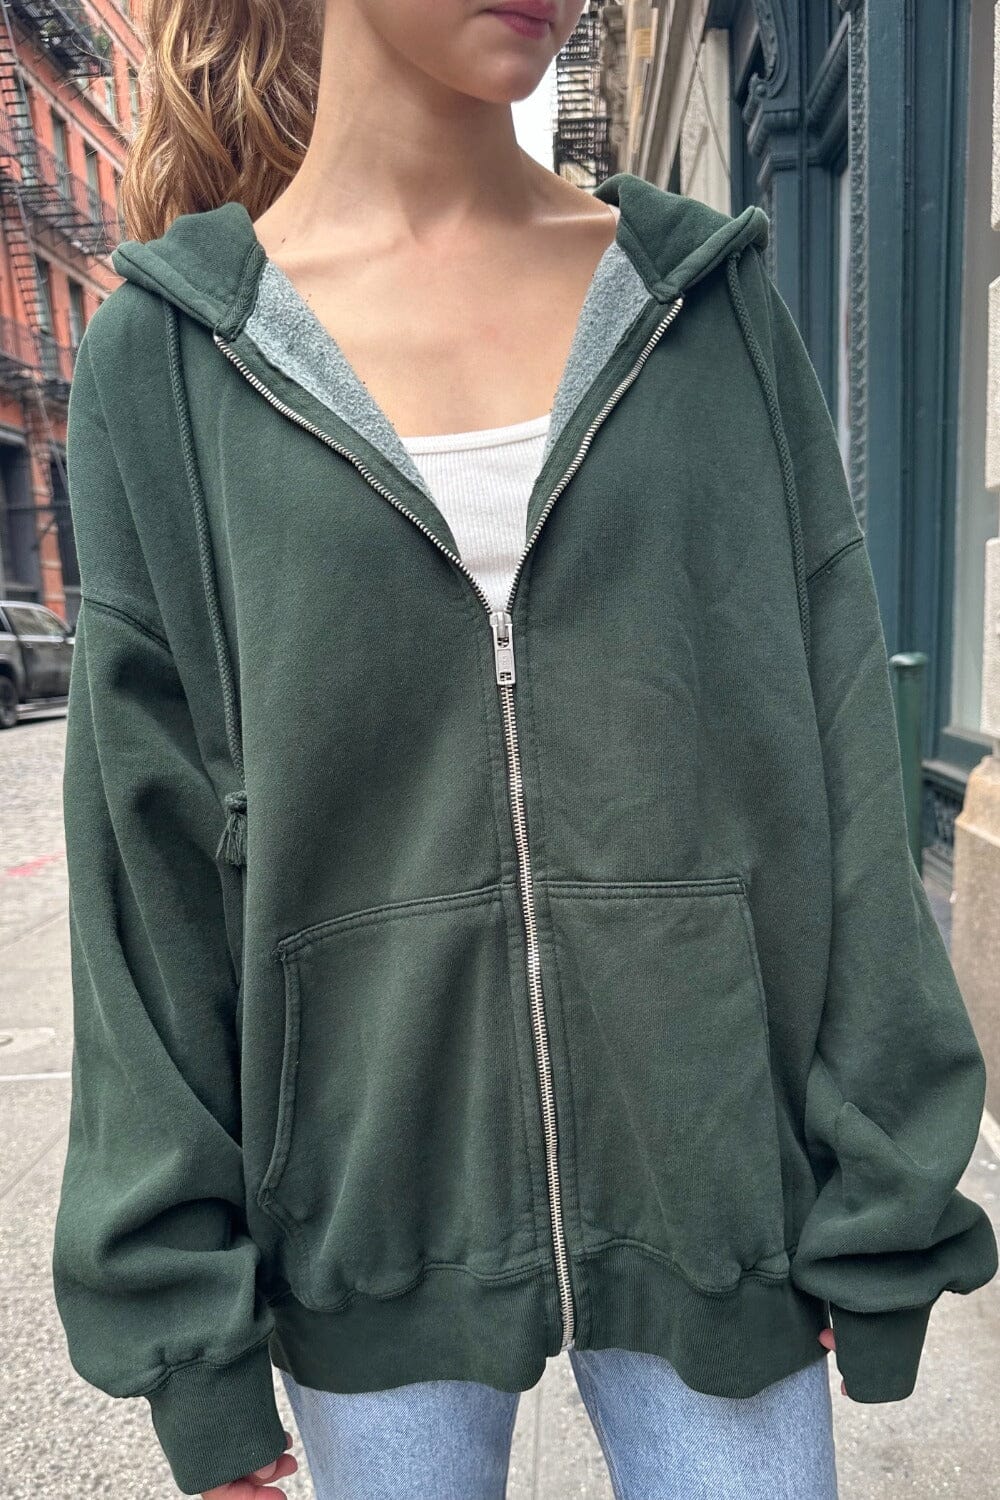 brandy melville christy hoodie!  Crewneck outfit, Brandy melville hoodie  outfit, Christy hoodie